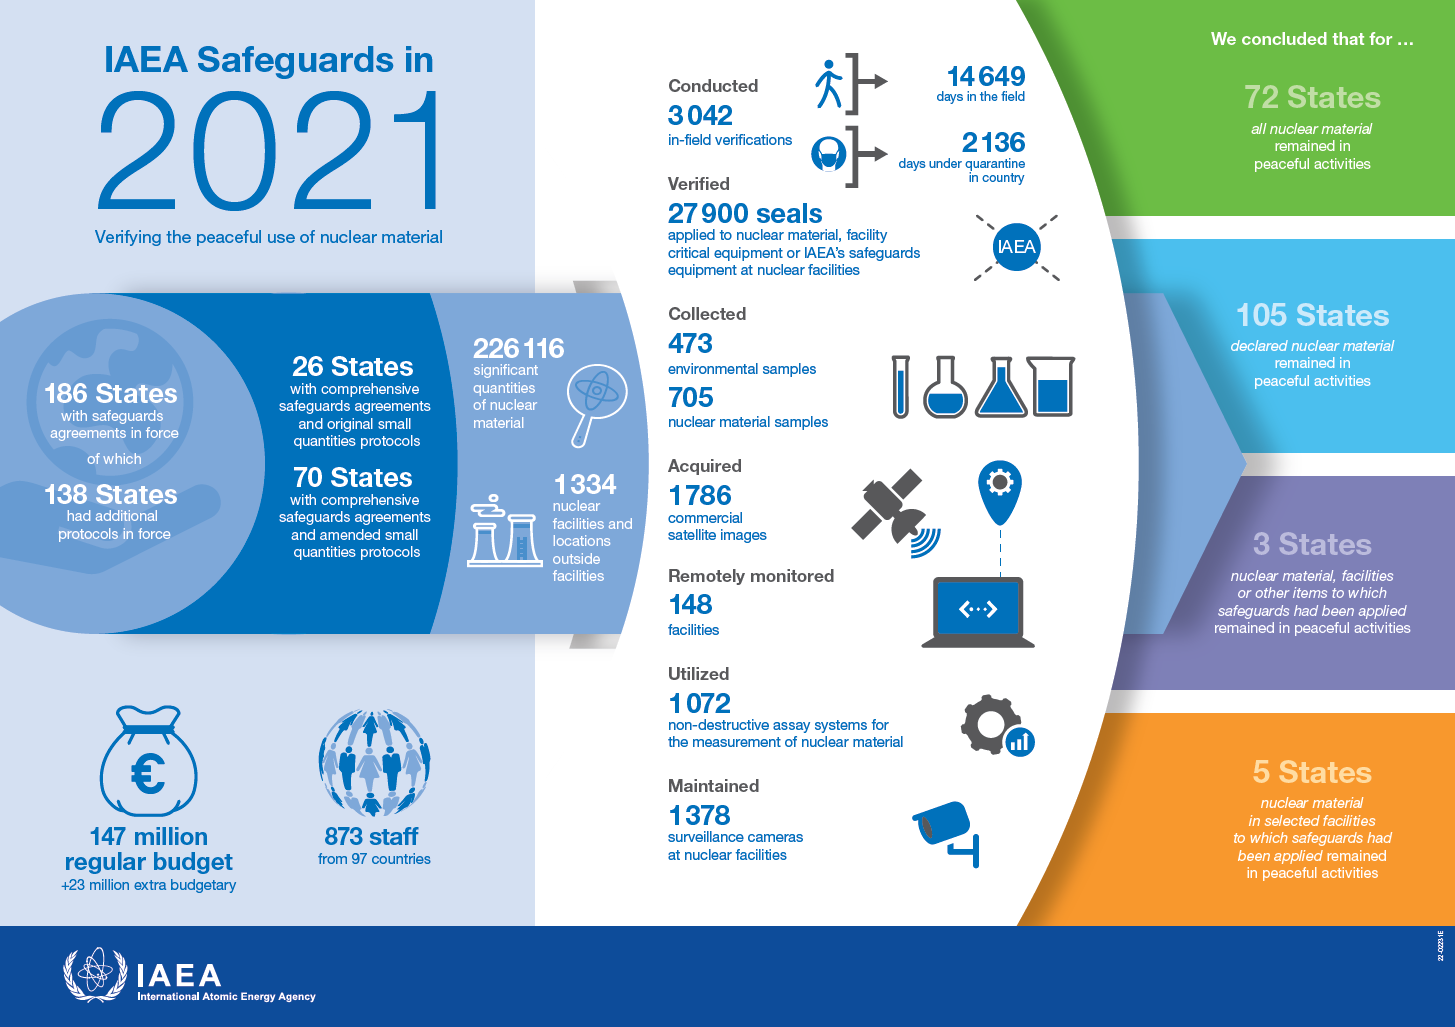 The infographic illustrates safeguards implementation in 2021